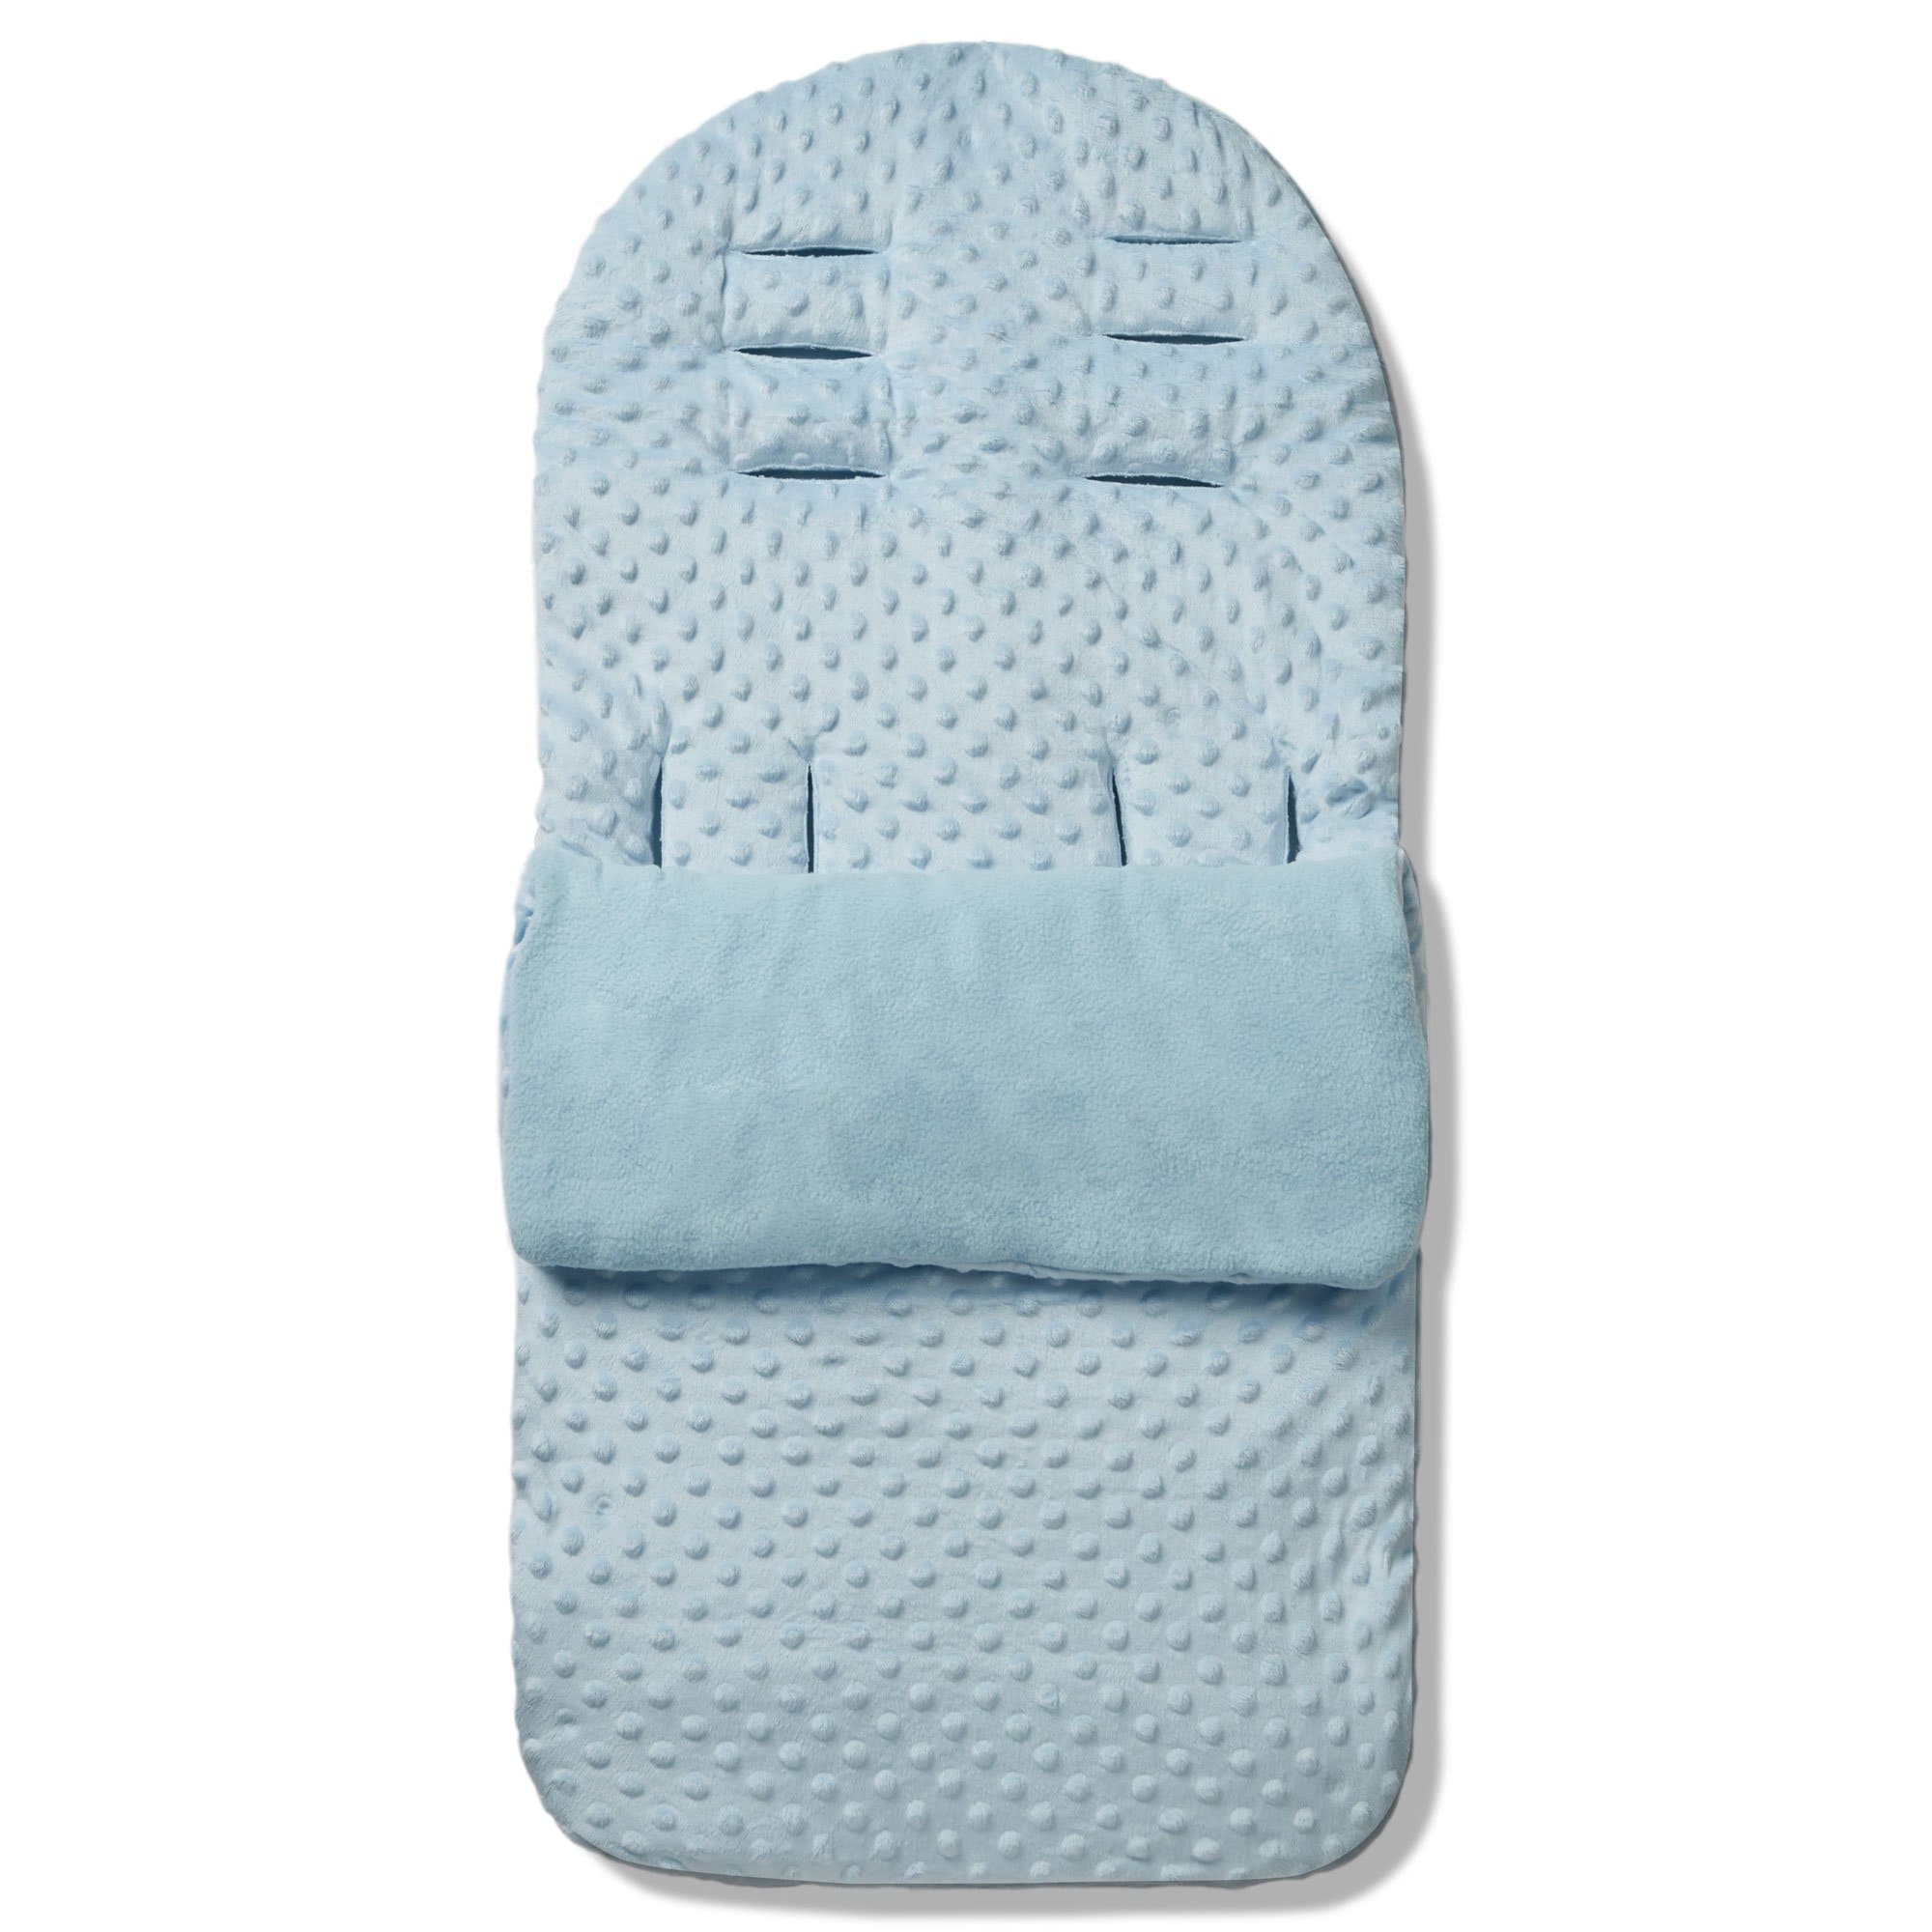 Dimple Footmuff / Cosy Toes Compatible with Kiddicare - Blue / Fits All Models | For Your Little One